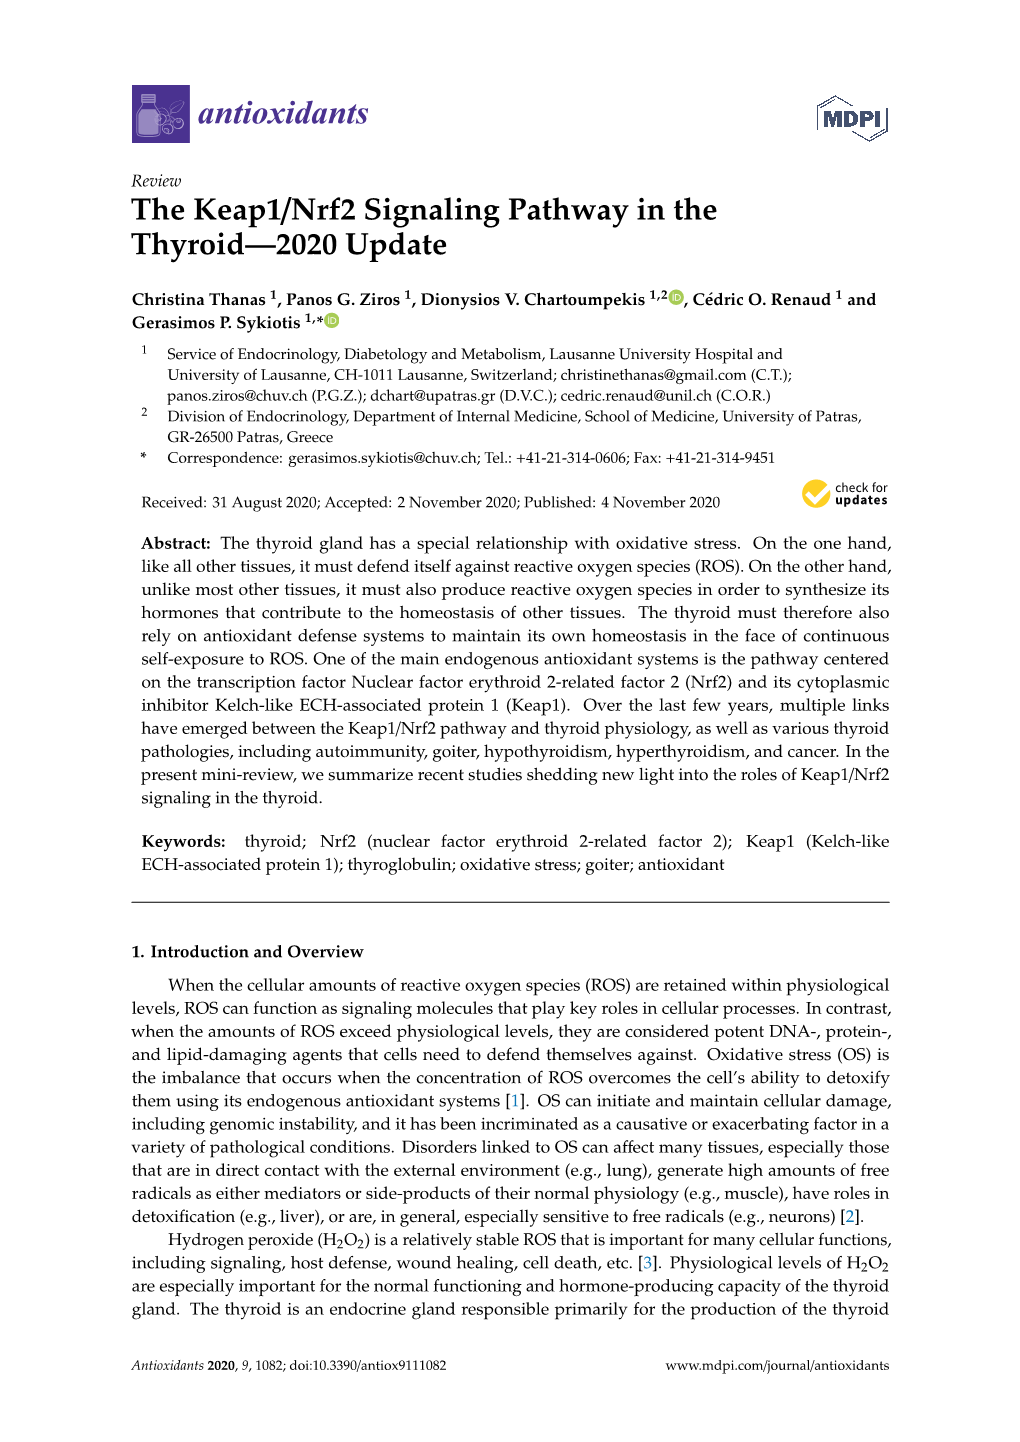 The Keap1/Nrf2 Signaling Pathway in the Thyroid—2020 Update